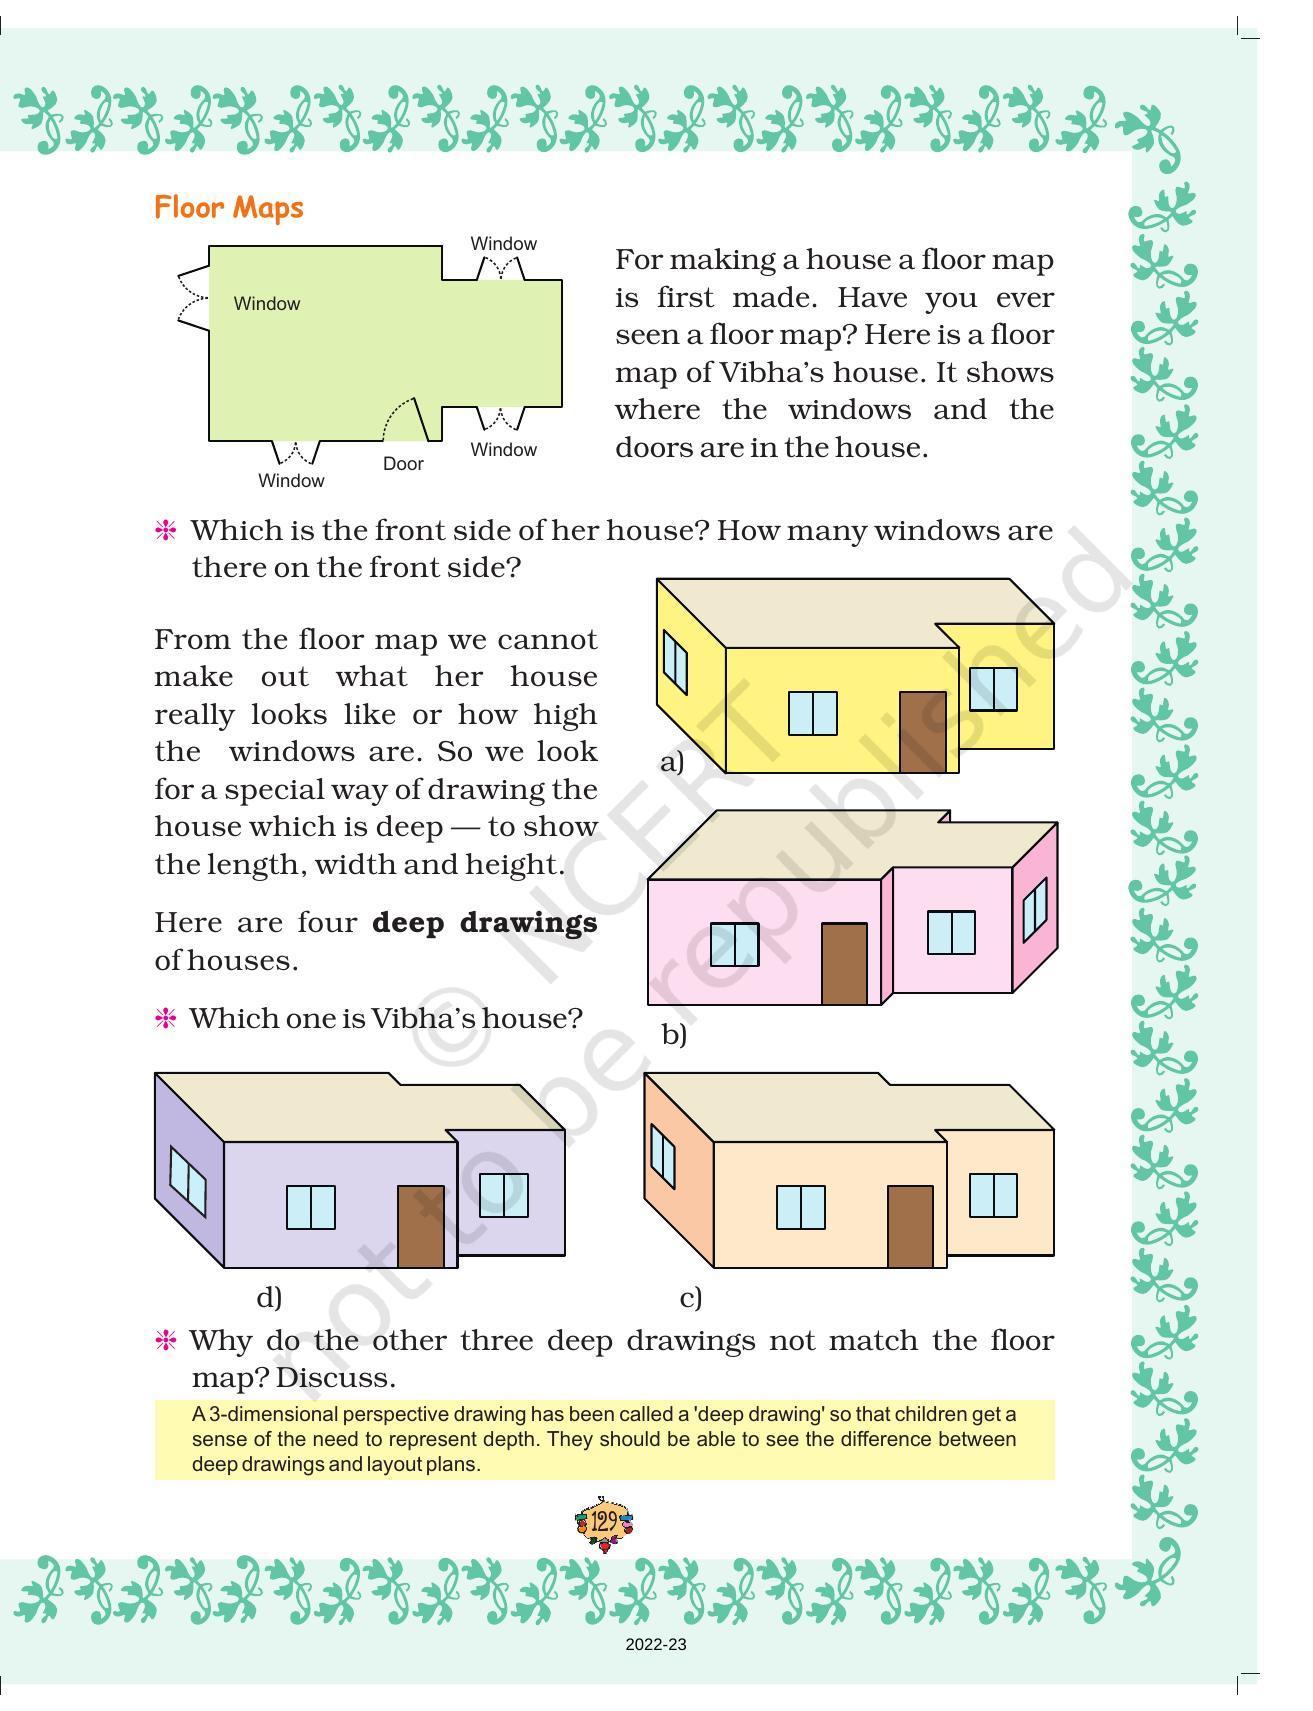 NCERT Book for Class 5 Maths Chapter 9 Boxes and Sketches - Page 4